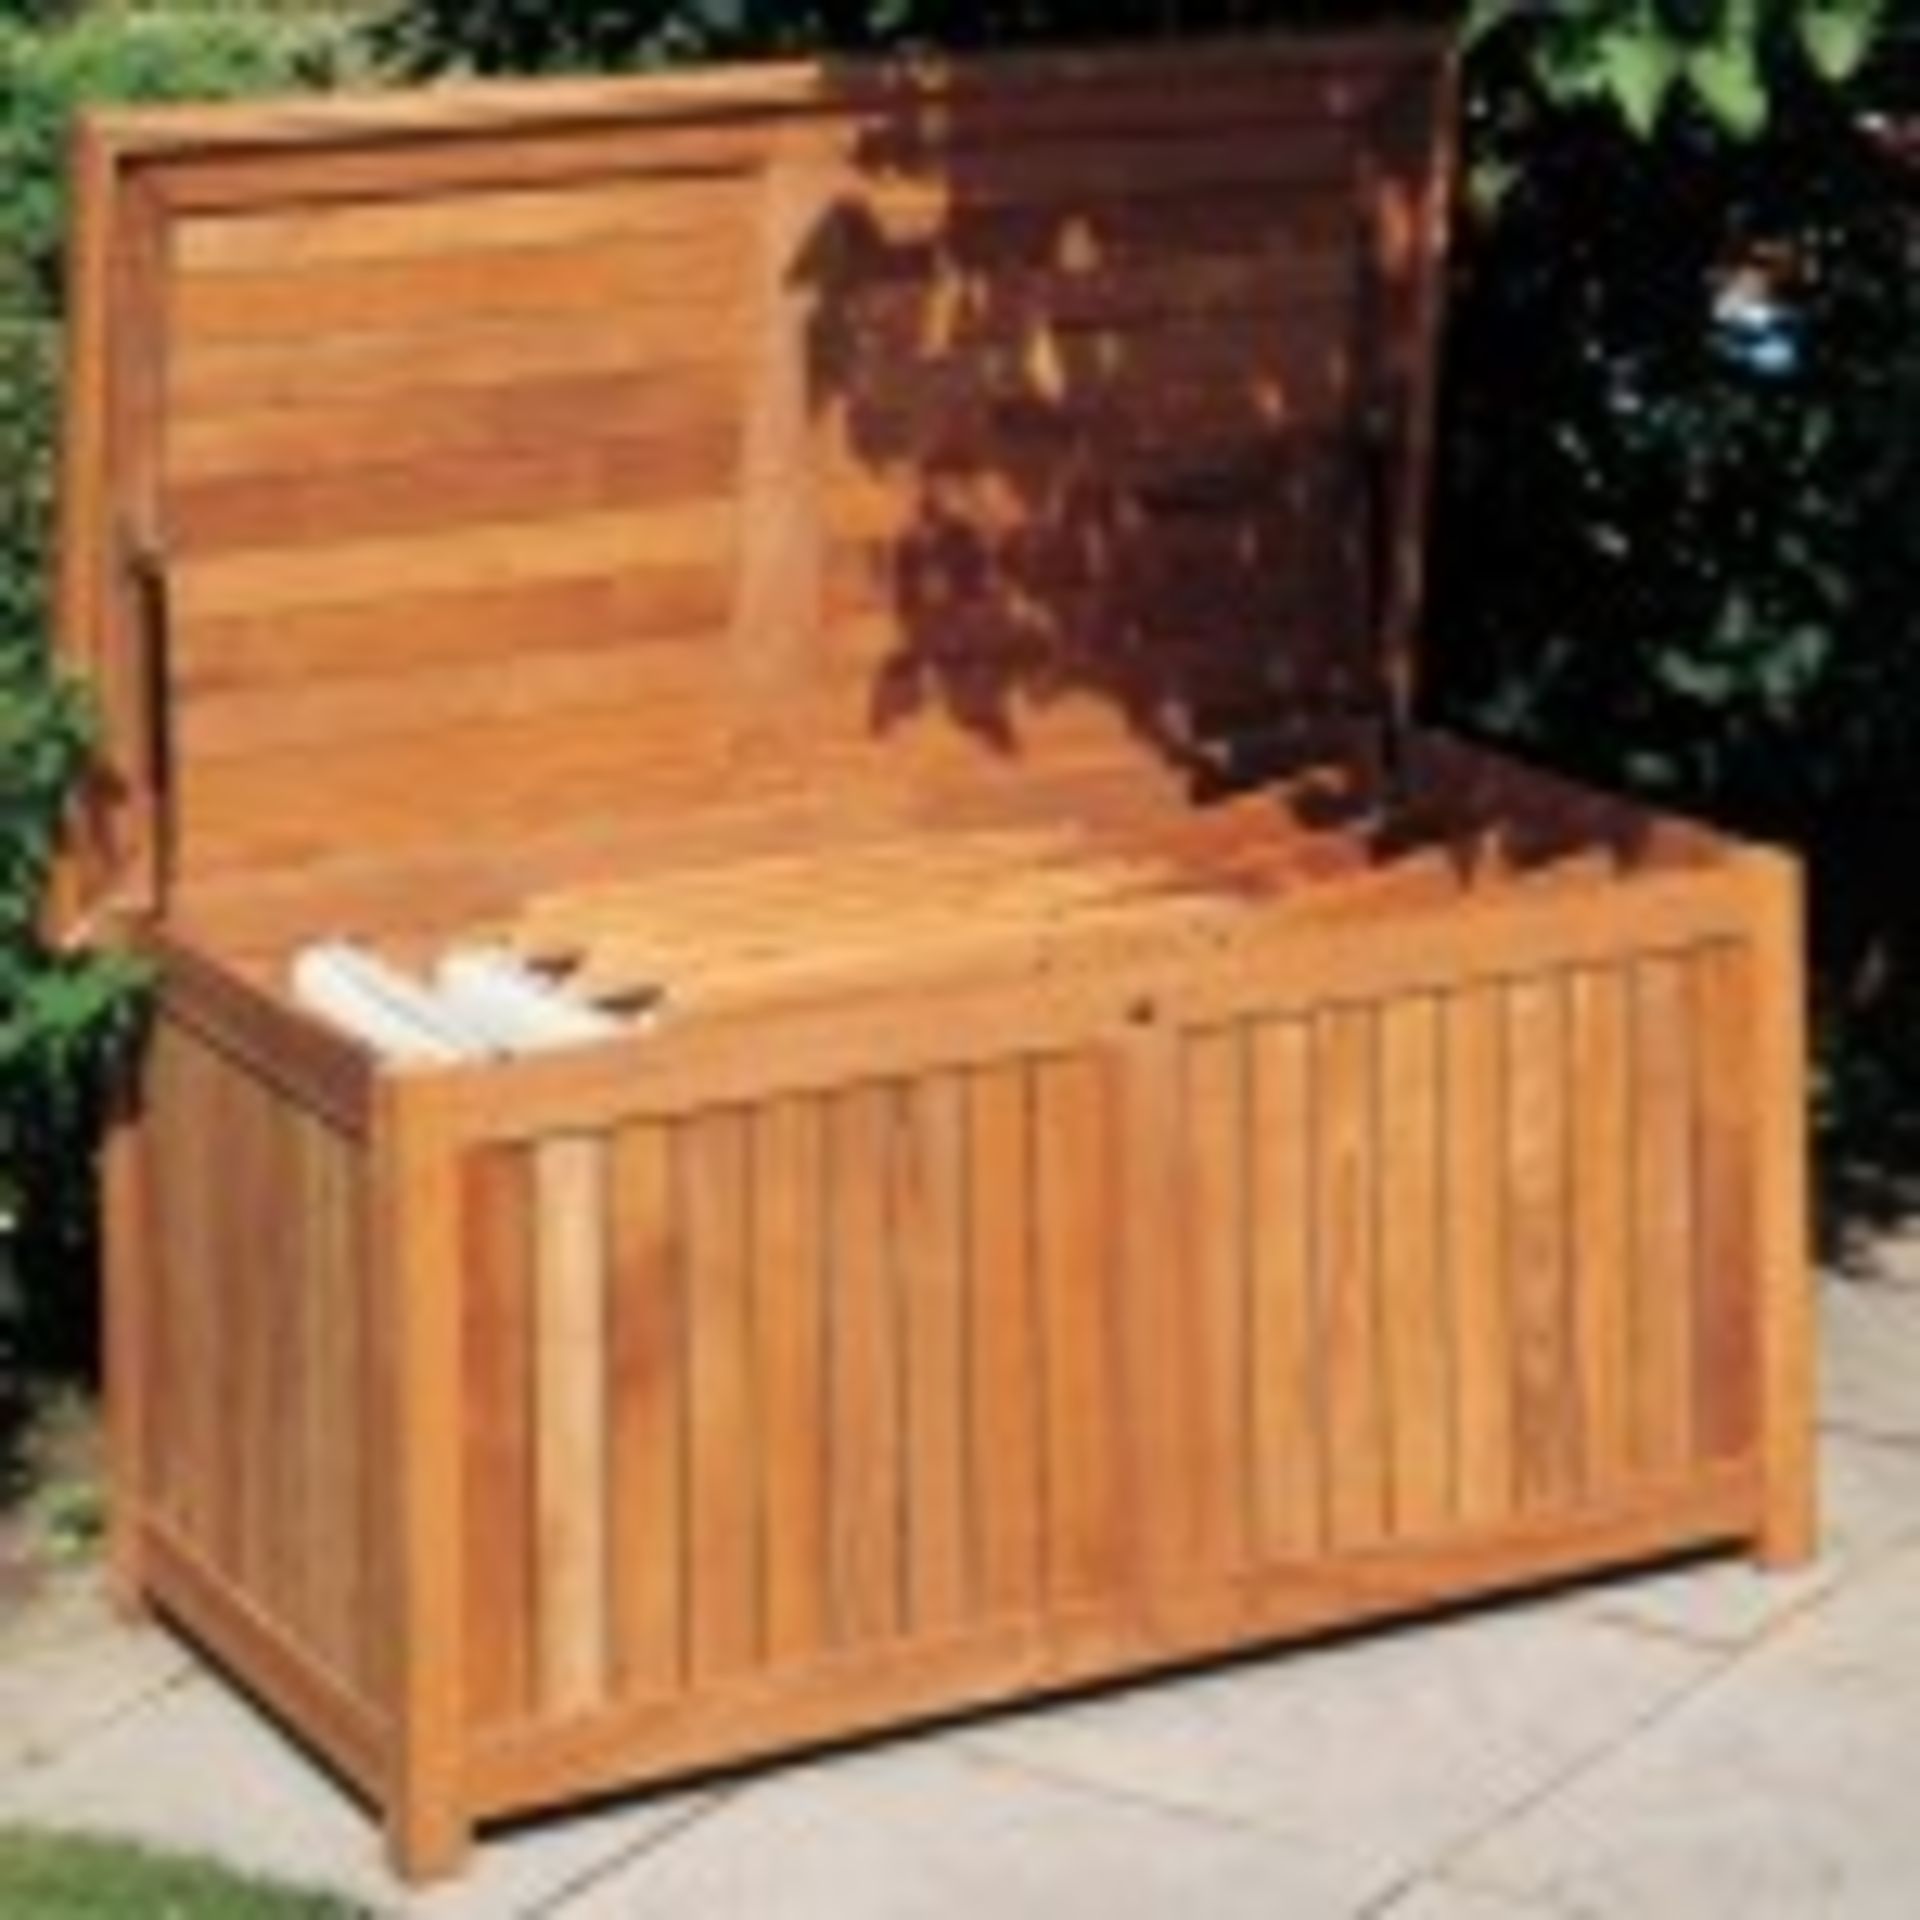 V Brand New Teak Chaise Storage box - Made From Grade A Plantation Teak - New In Box - Available